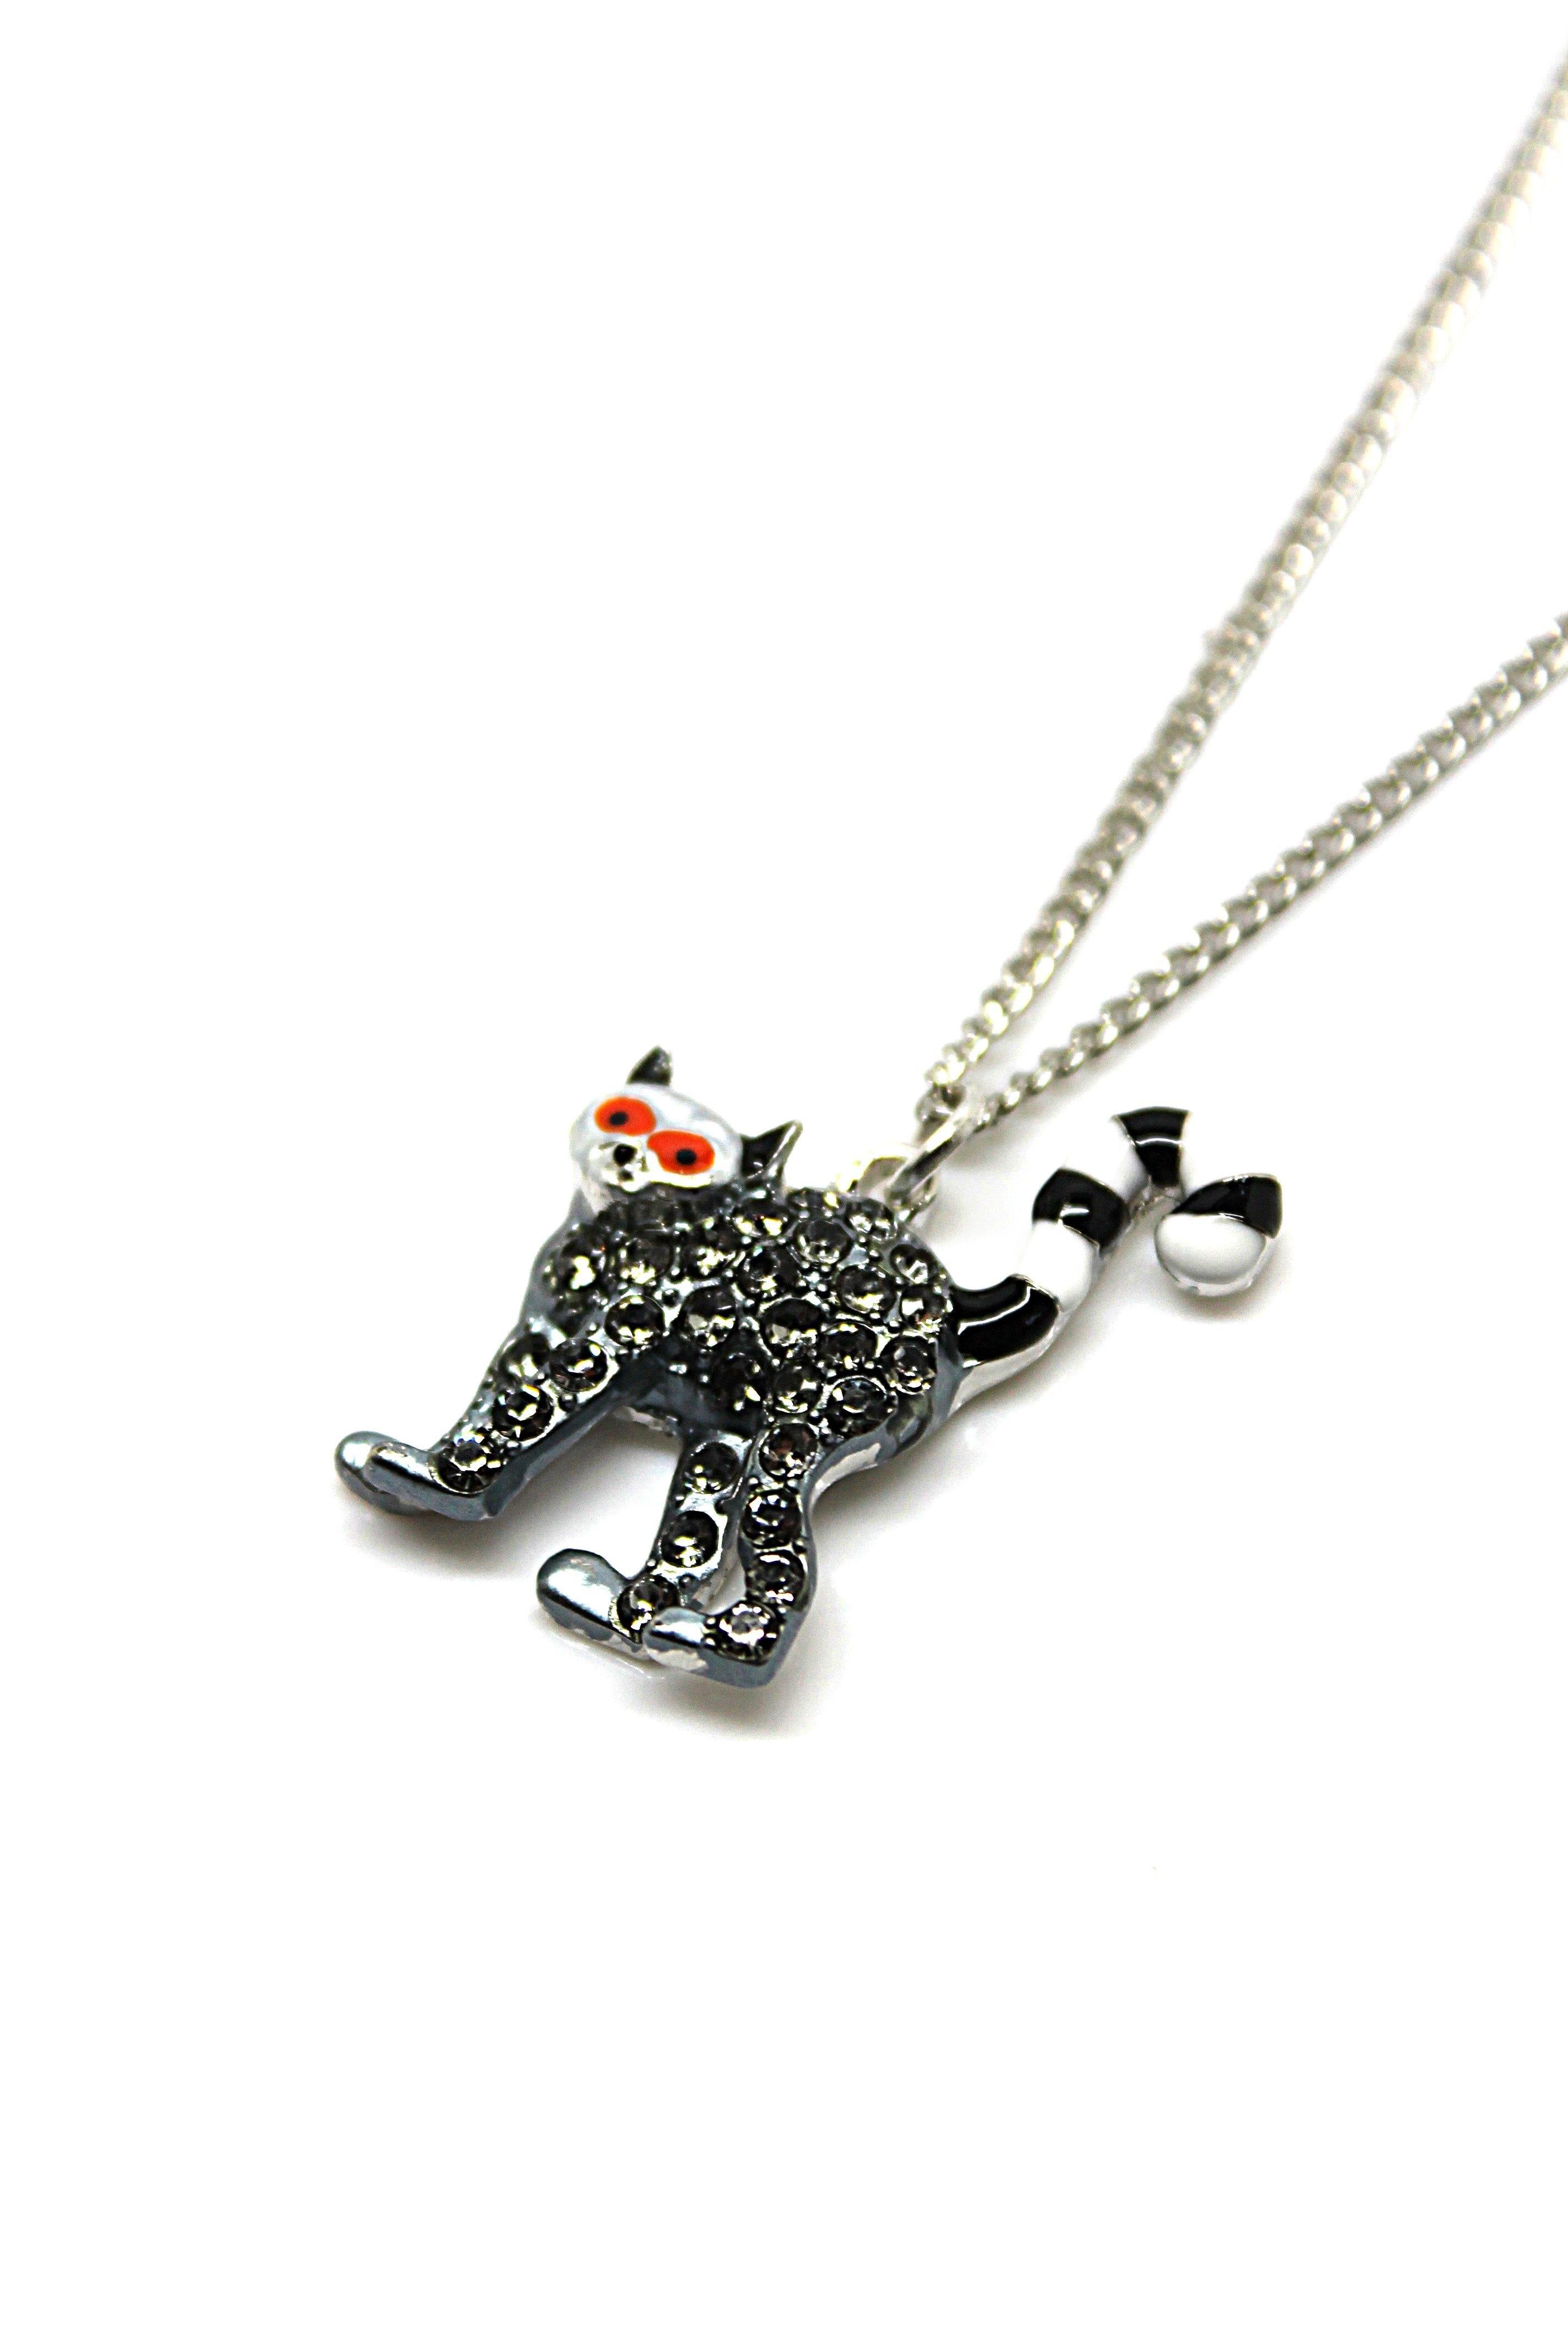 Lemur Necklace - Wildtouch - Wildtouch